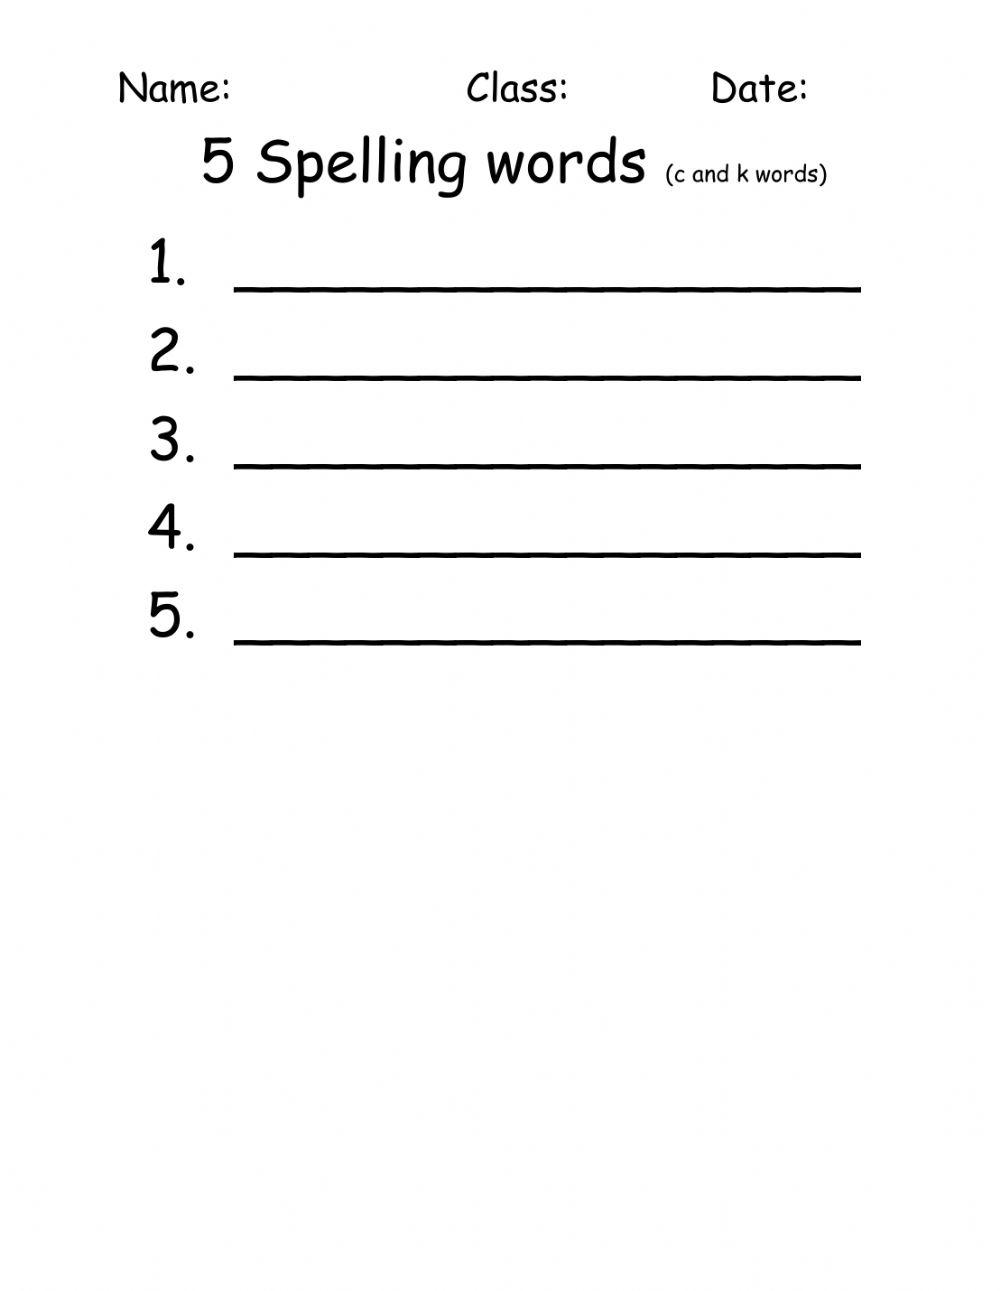 Spelling c and k words